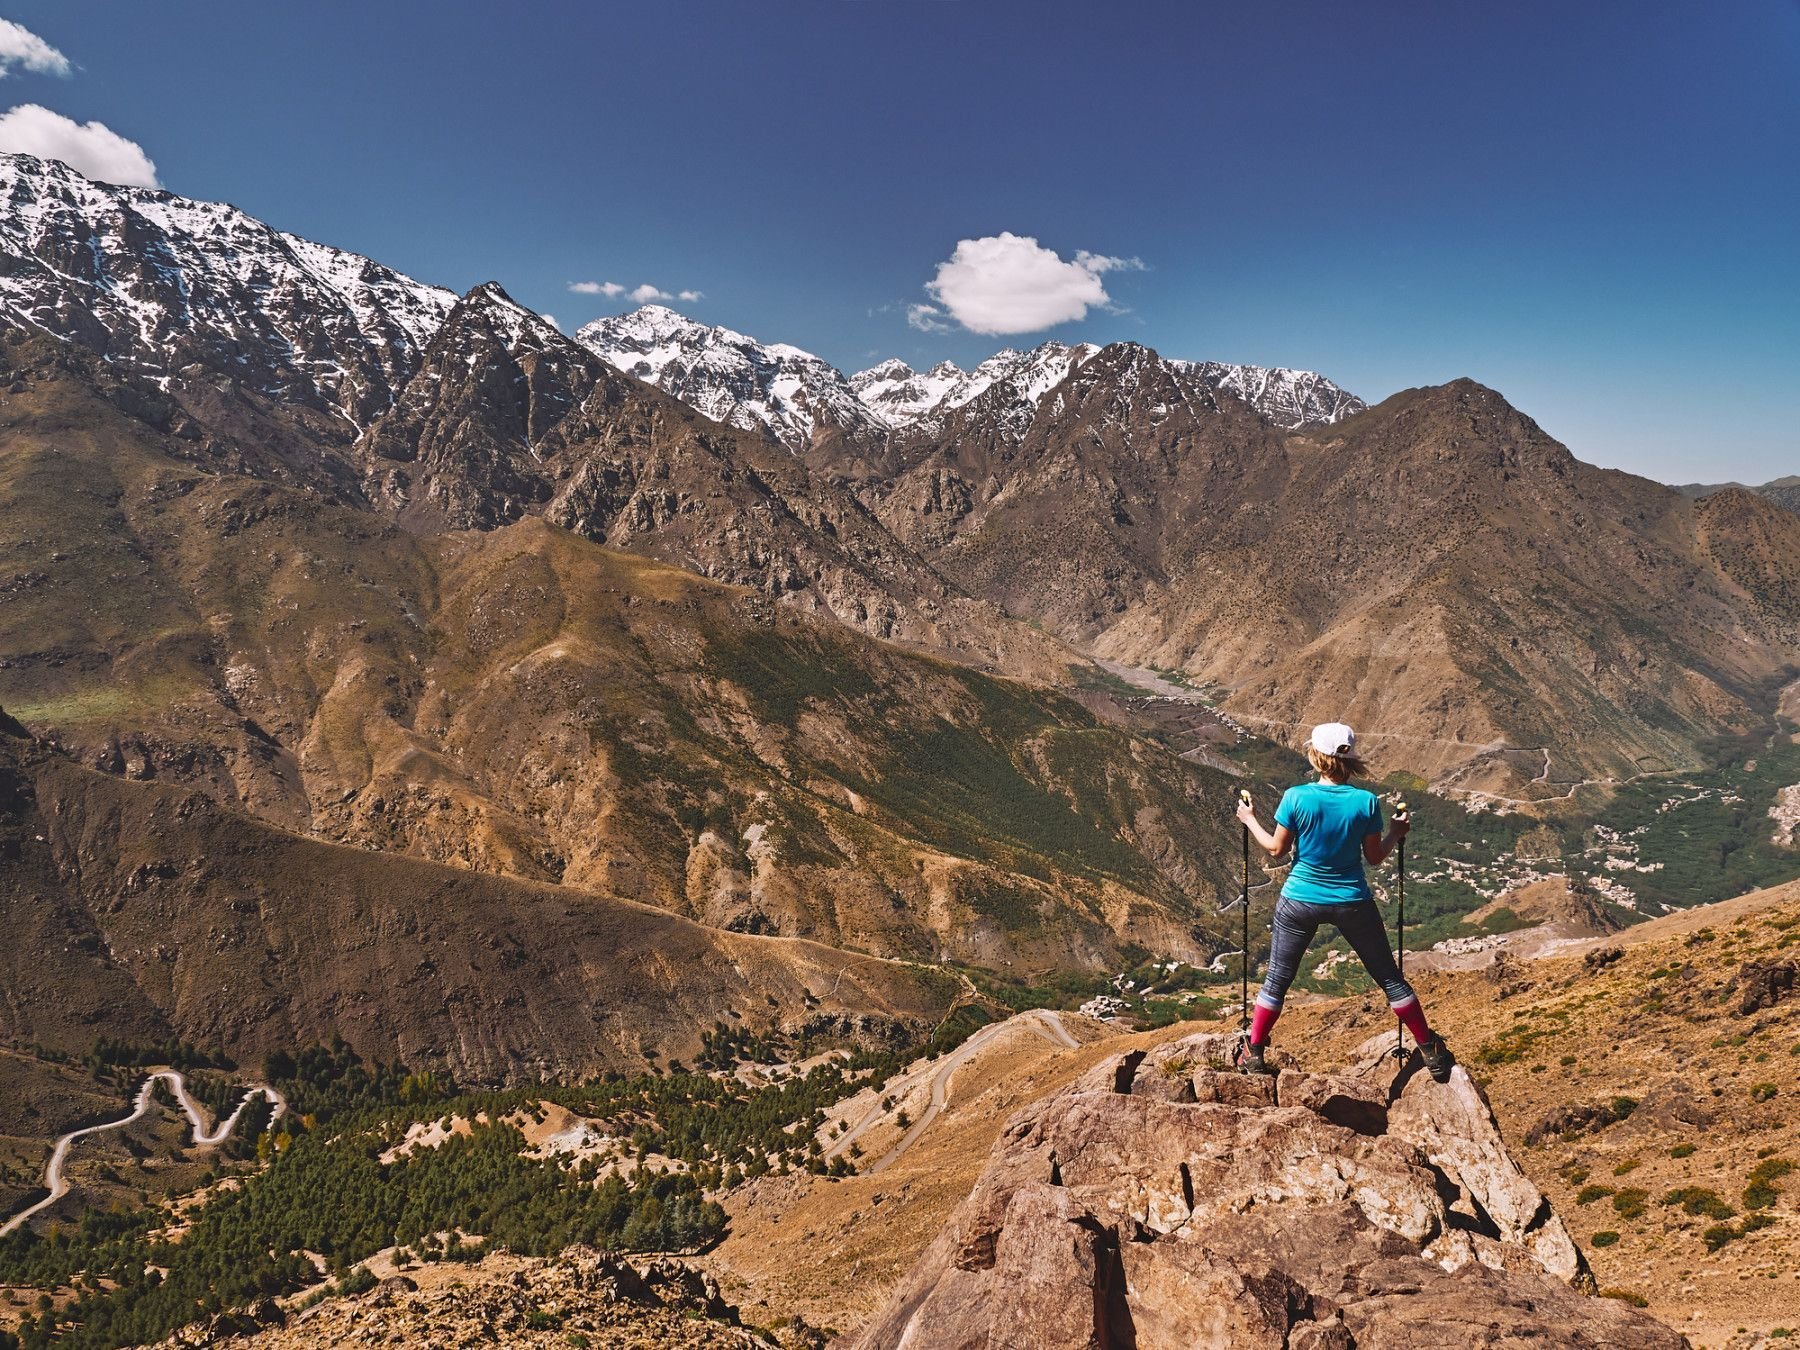 A woman admires the view in the High Atlas Mountains, Morocco.